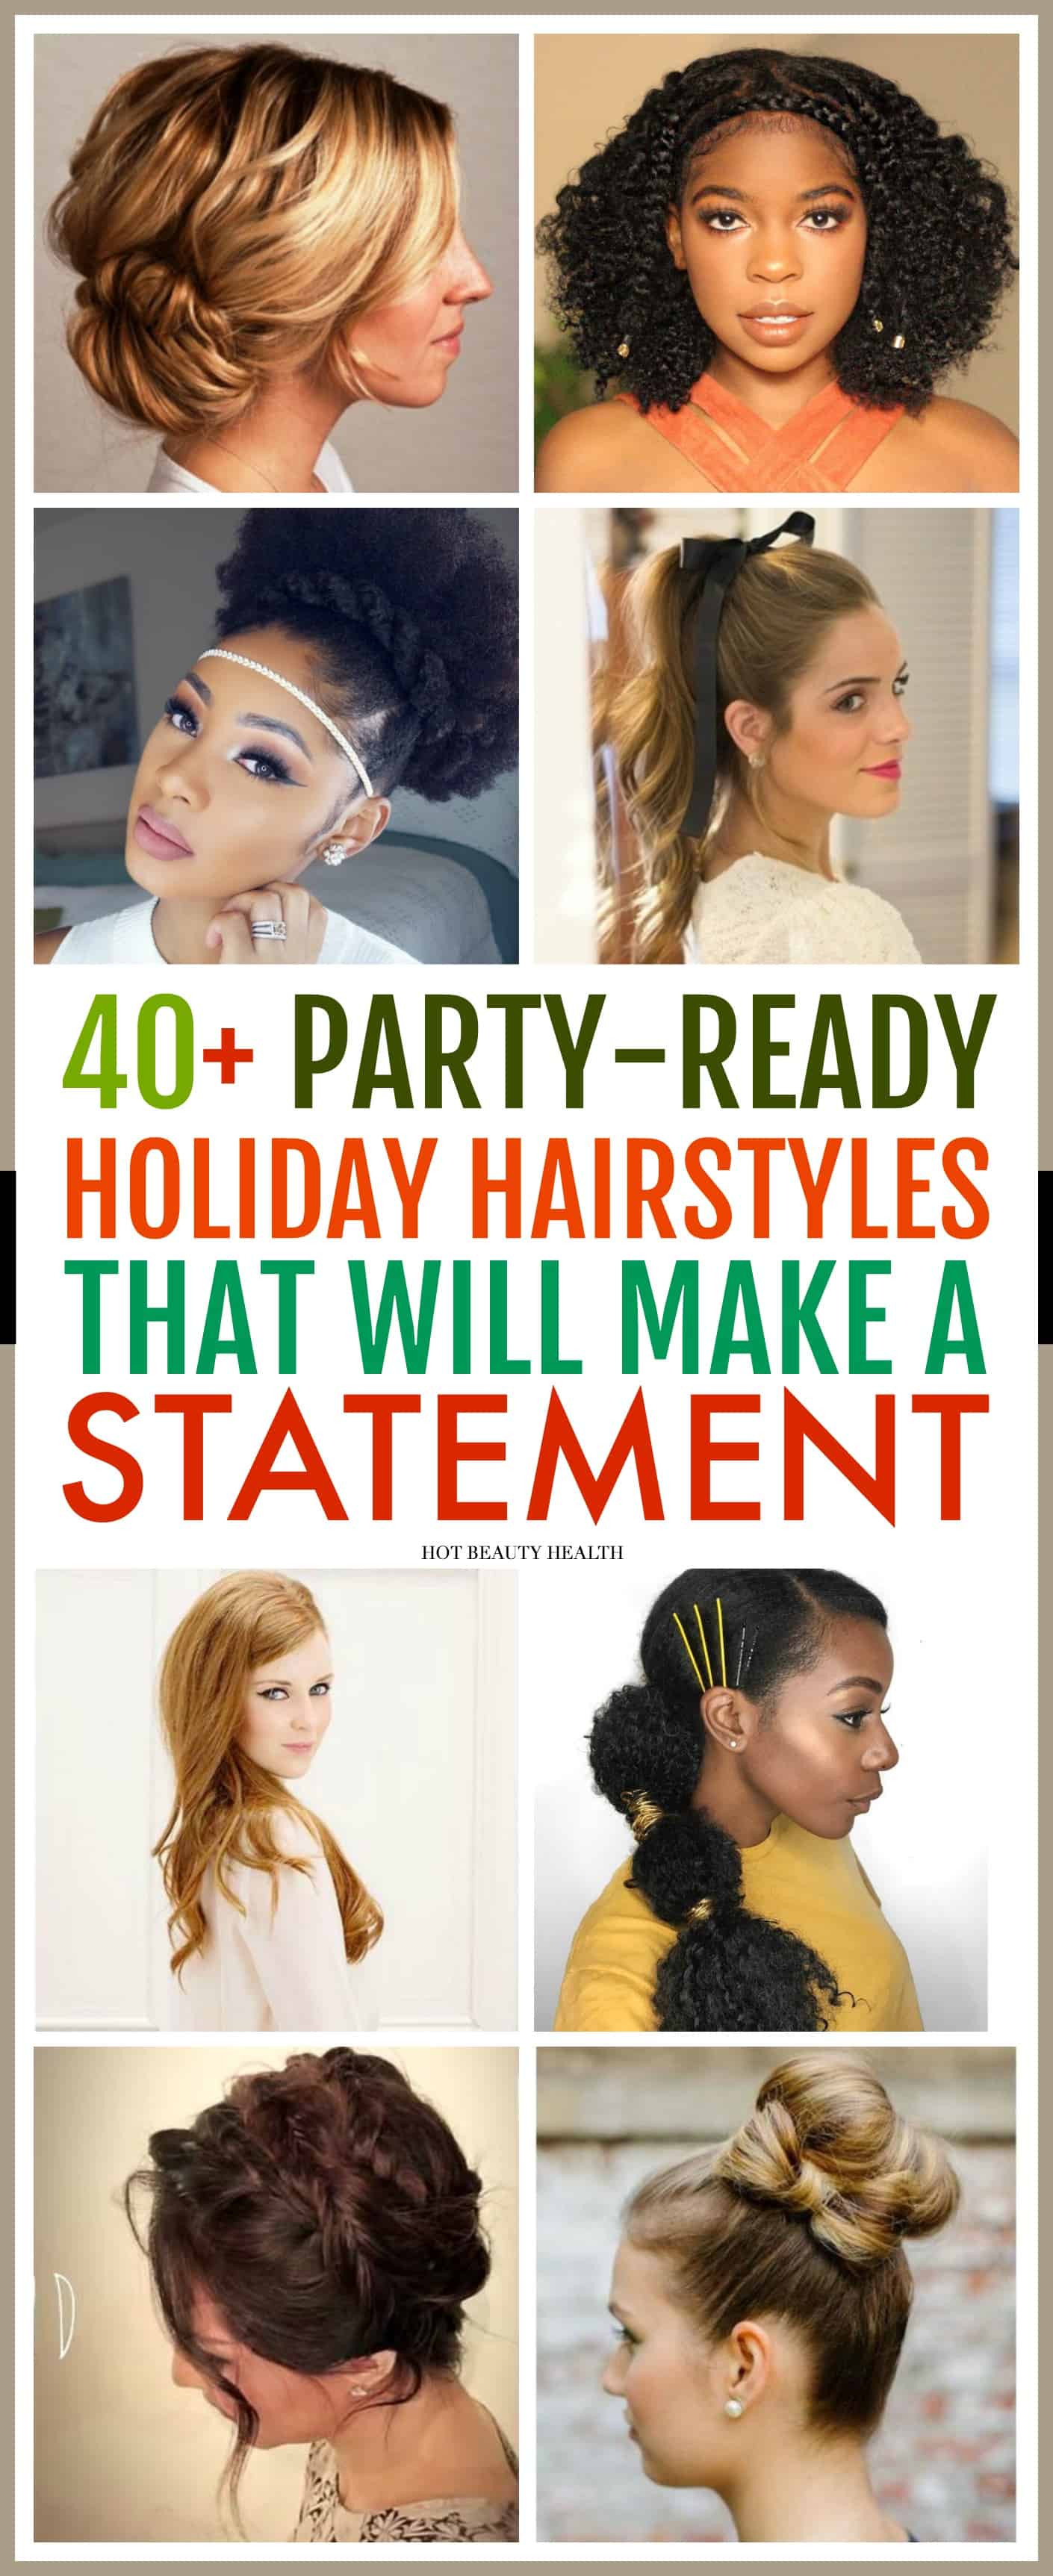 10 Holiday Hairstyles For Every Celebration | Carol's Daughter